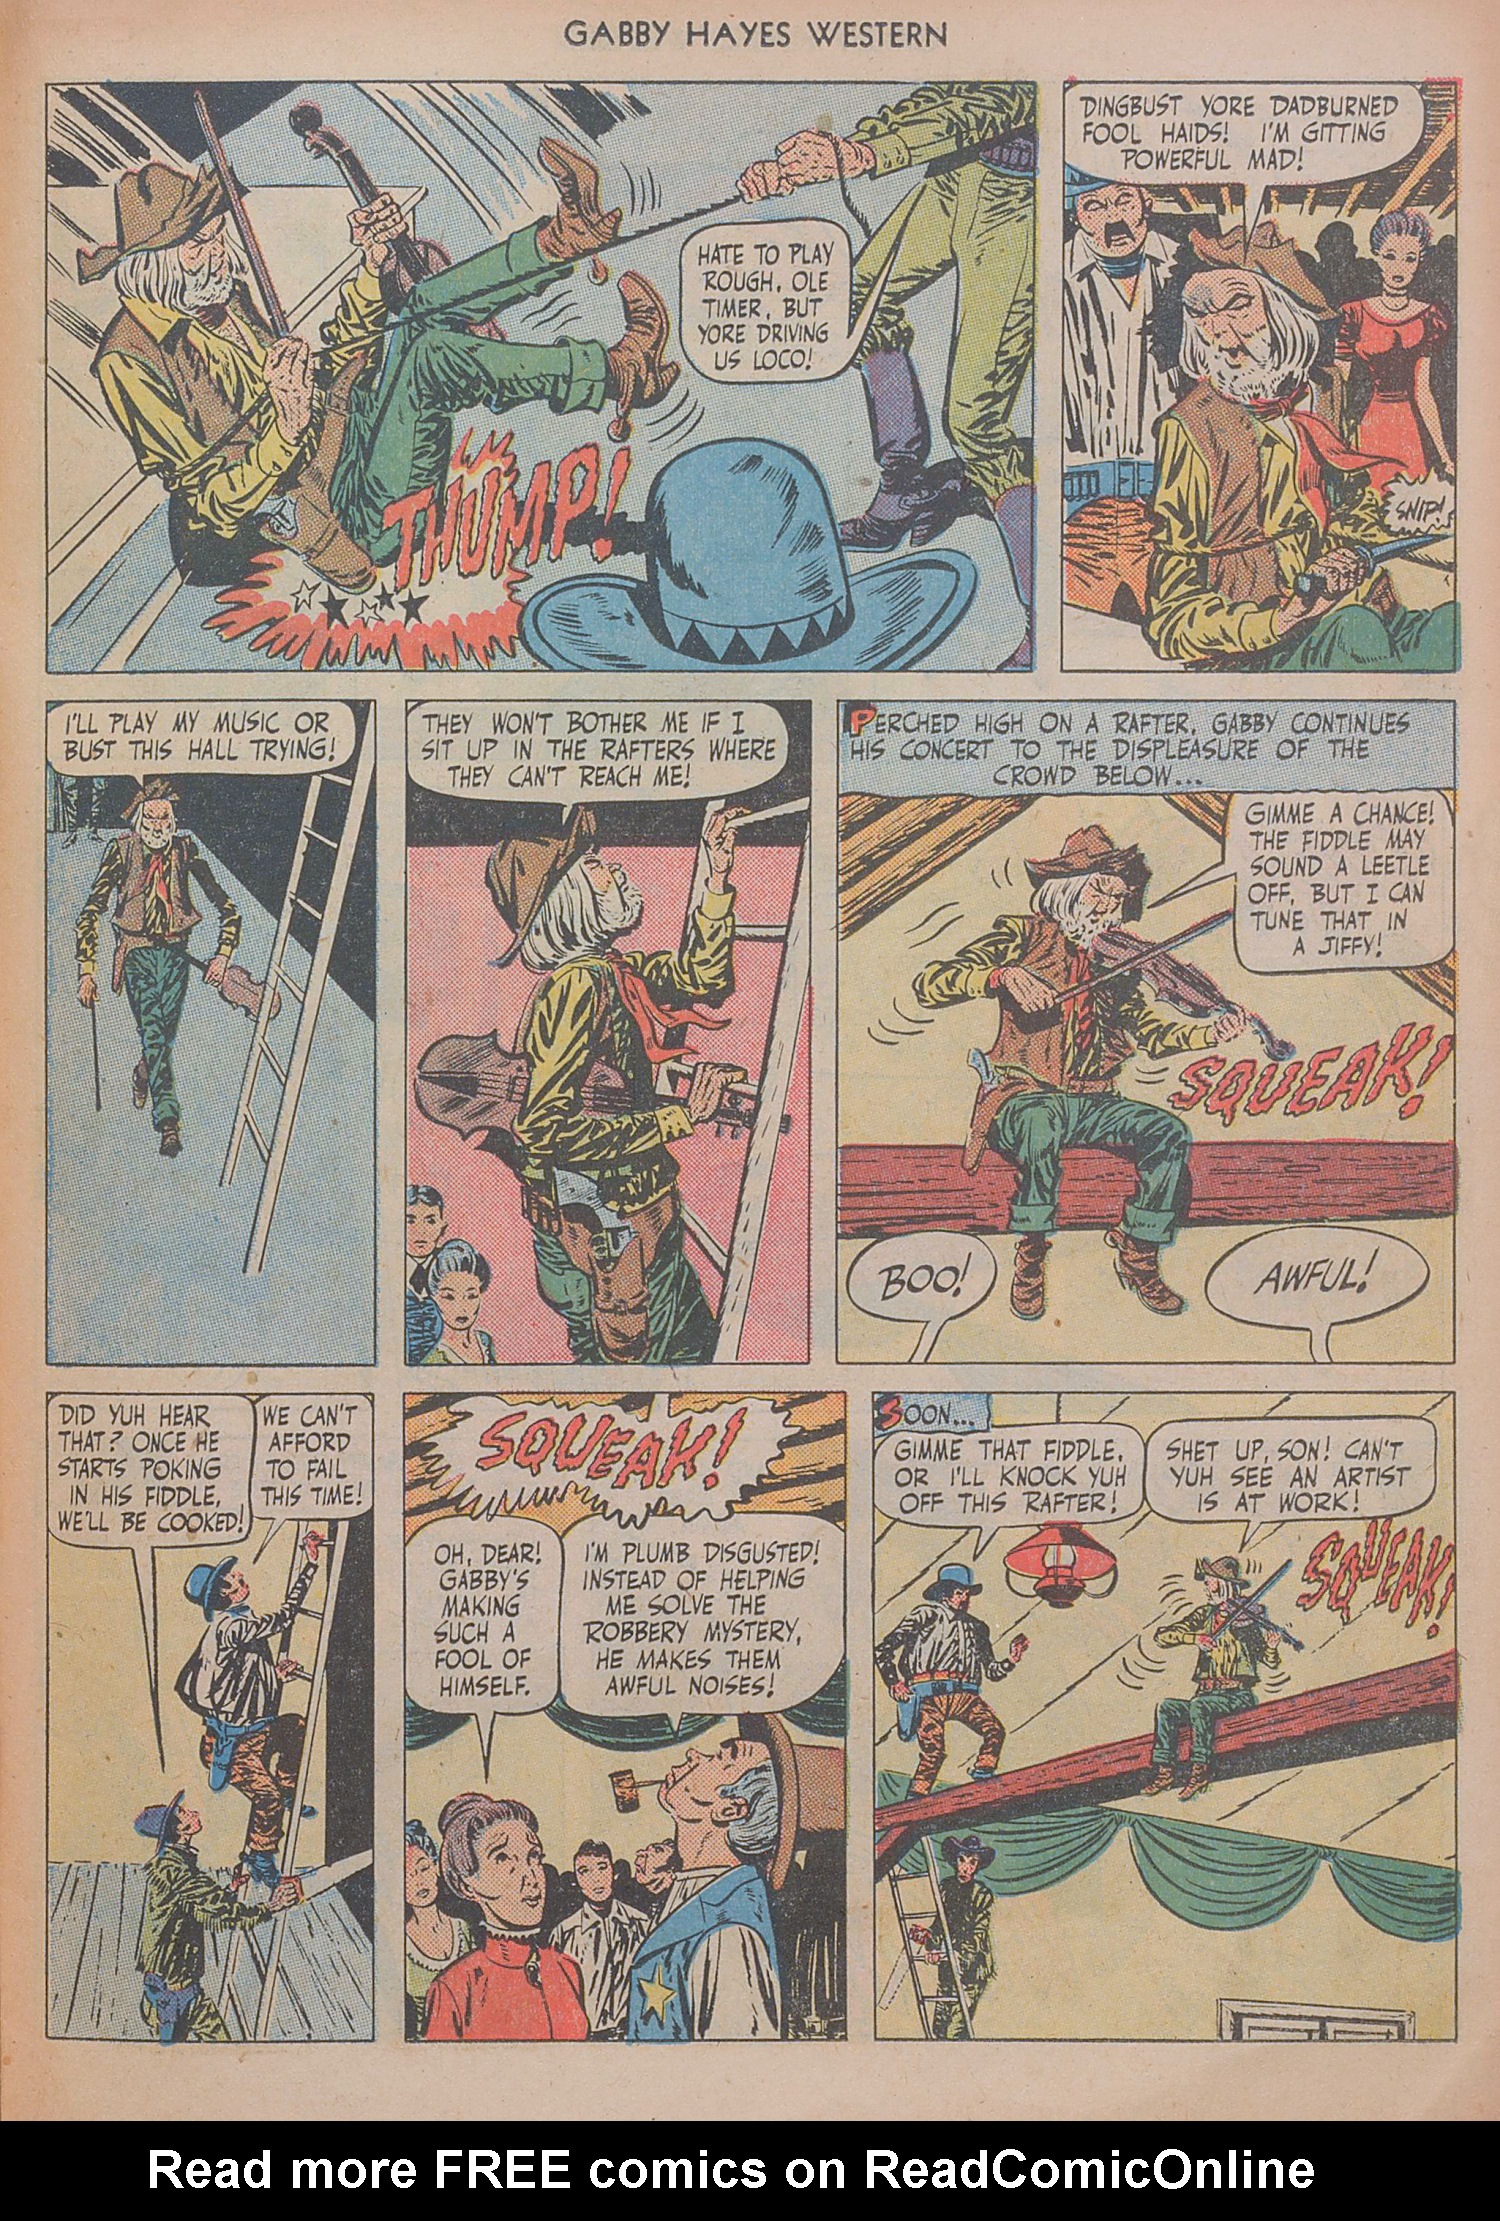 Read online Gabby Hayes Western comic -  Issue #20 - 23